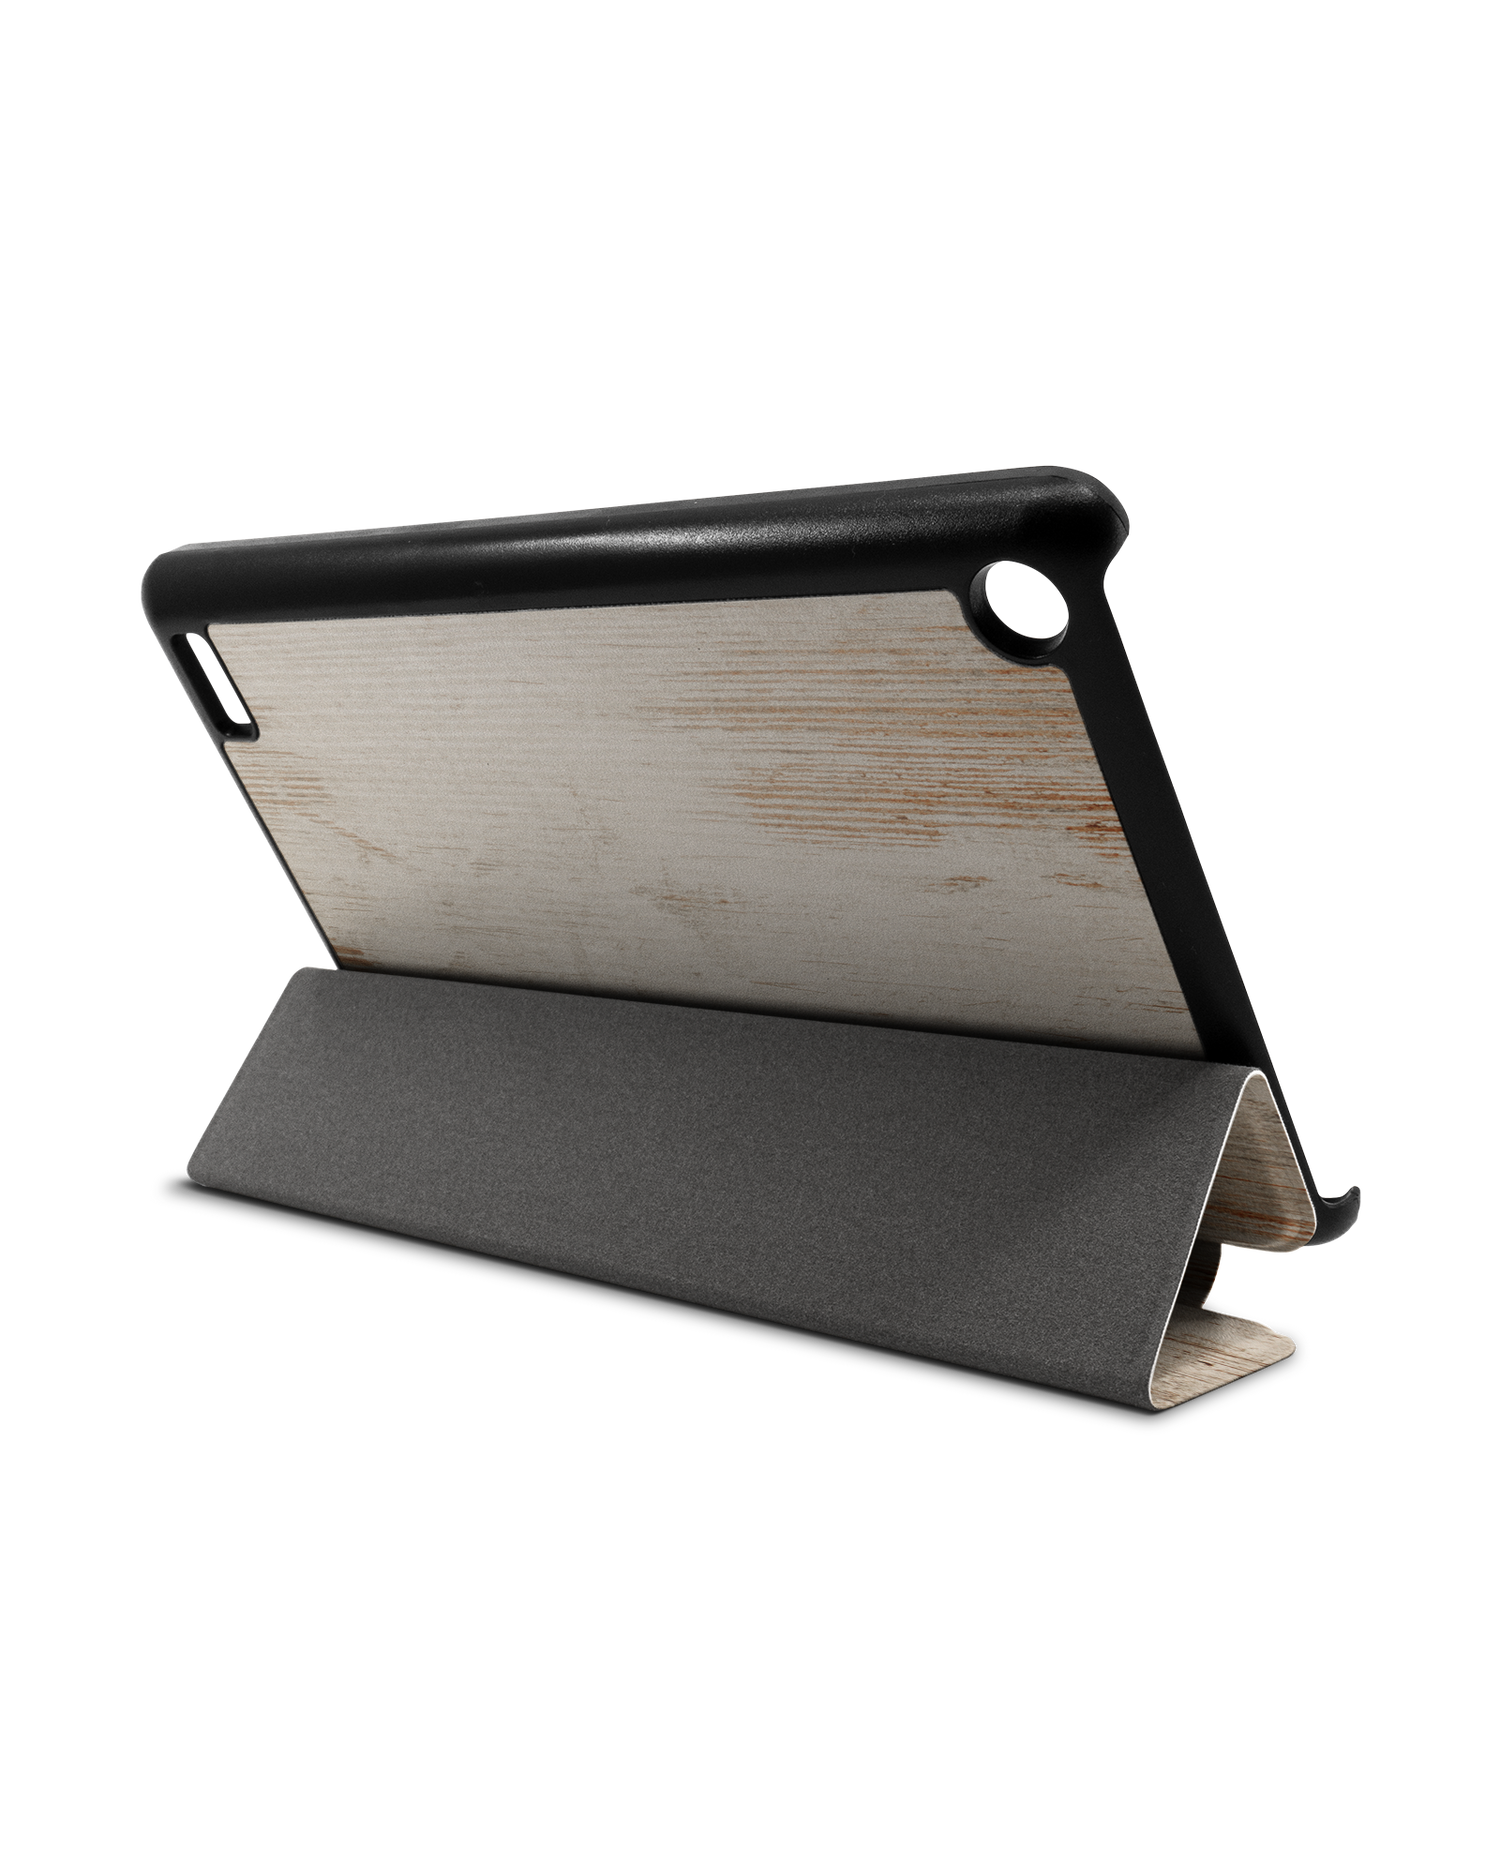 Drink Coffee Tablet Smart Case for Amazon Fire 7: Used as Stand